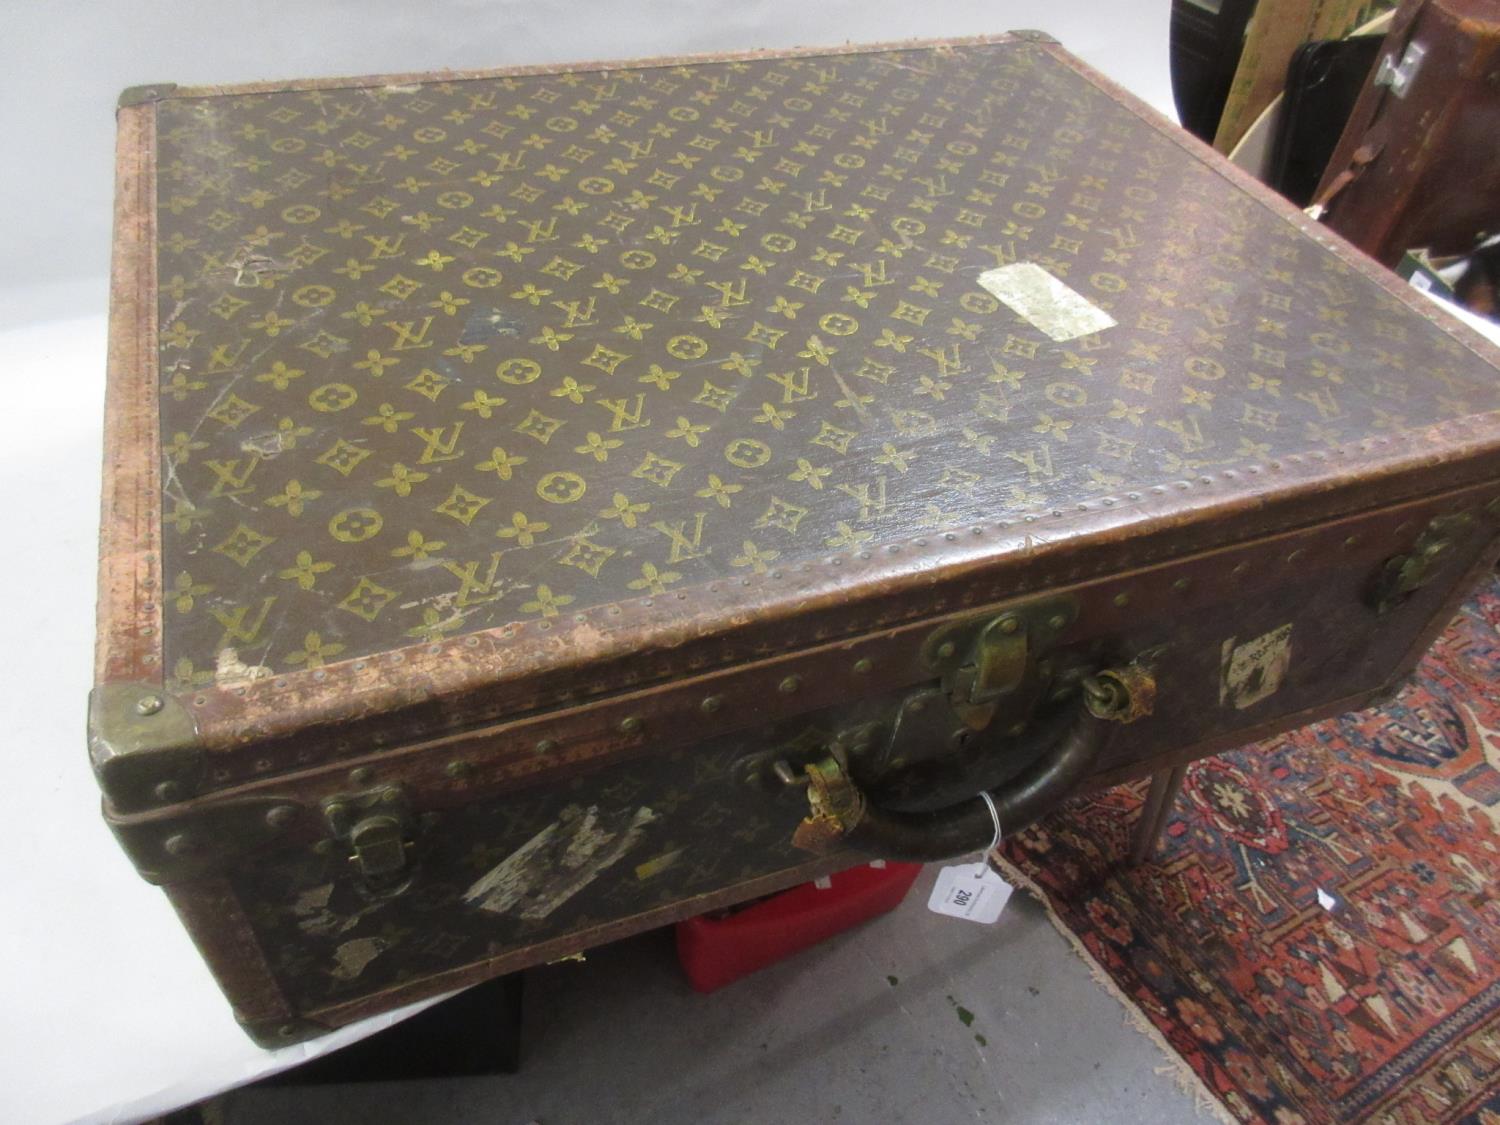 Louis Vuitton, early 20th Century suitcase decorated with the all-over monogram design, the original